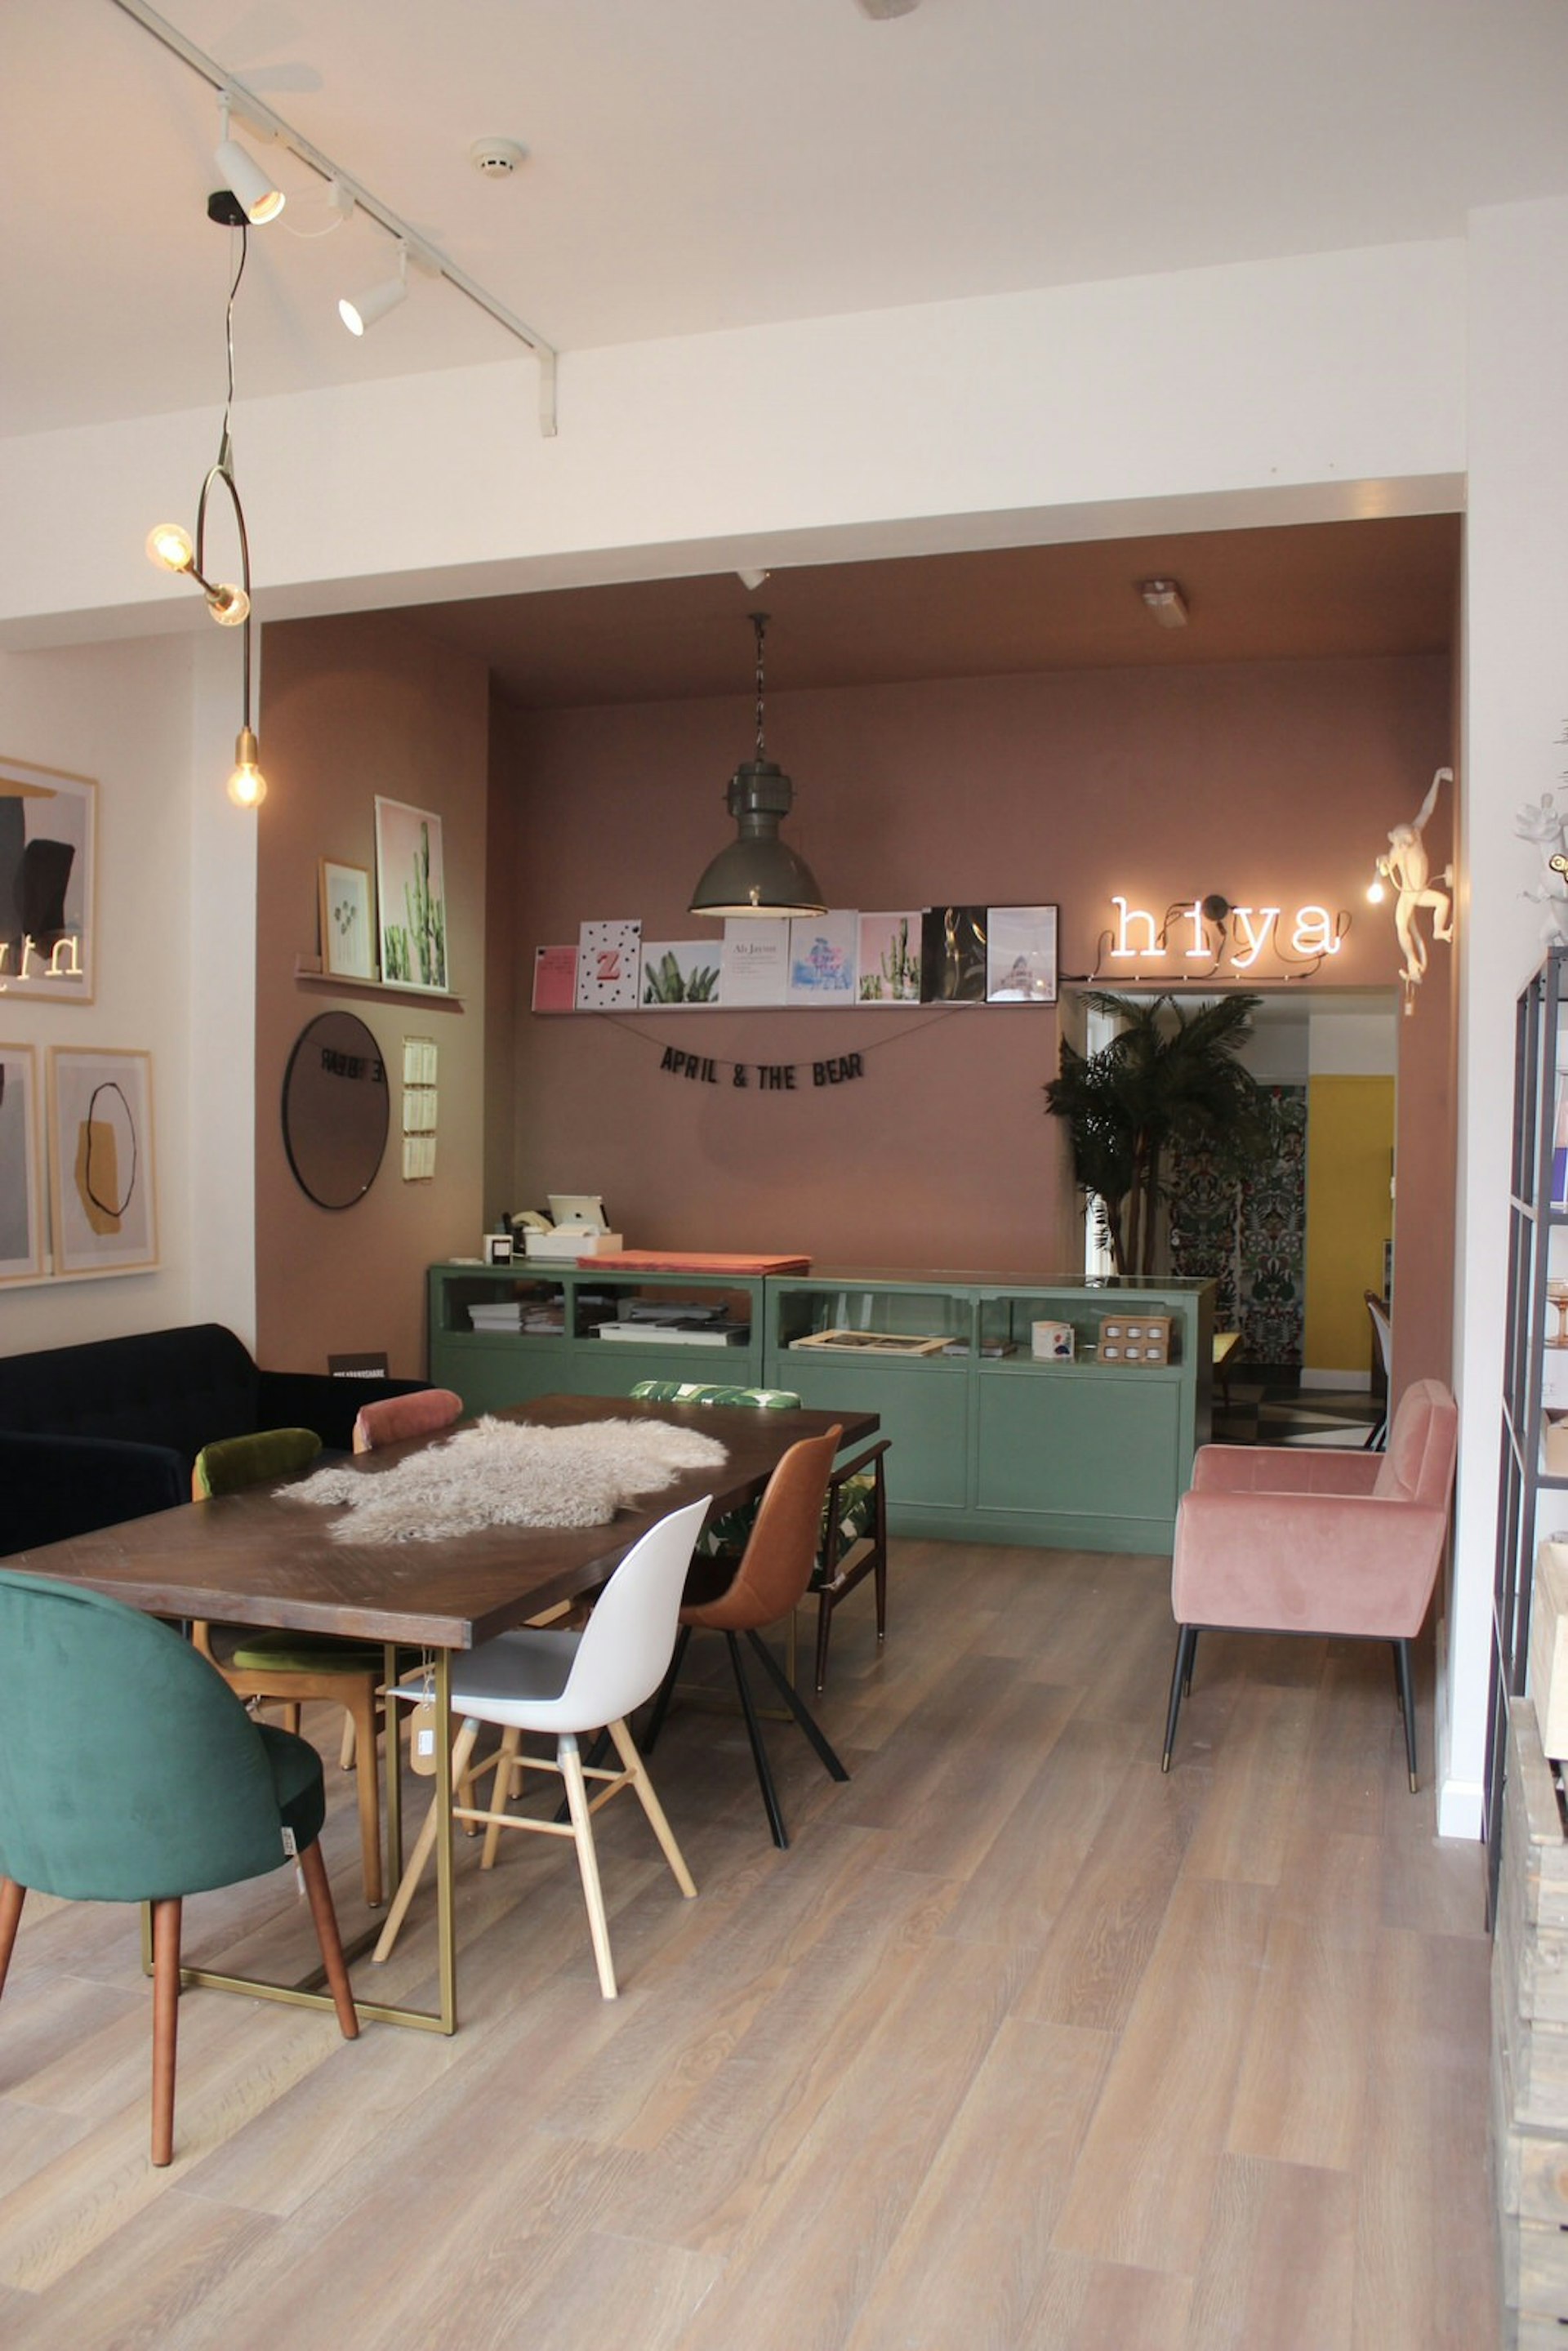 Dublin independent shops - the interior of April and the Bear independent shop with a long dark wood table in the middle surrounded by multicoloured chairs. There is a neon sign that says 'hiya' on the light-pink walls as well as other artwork and mirrors